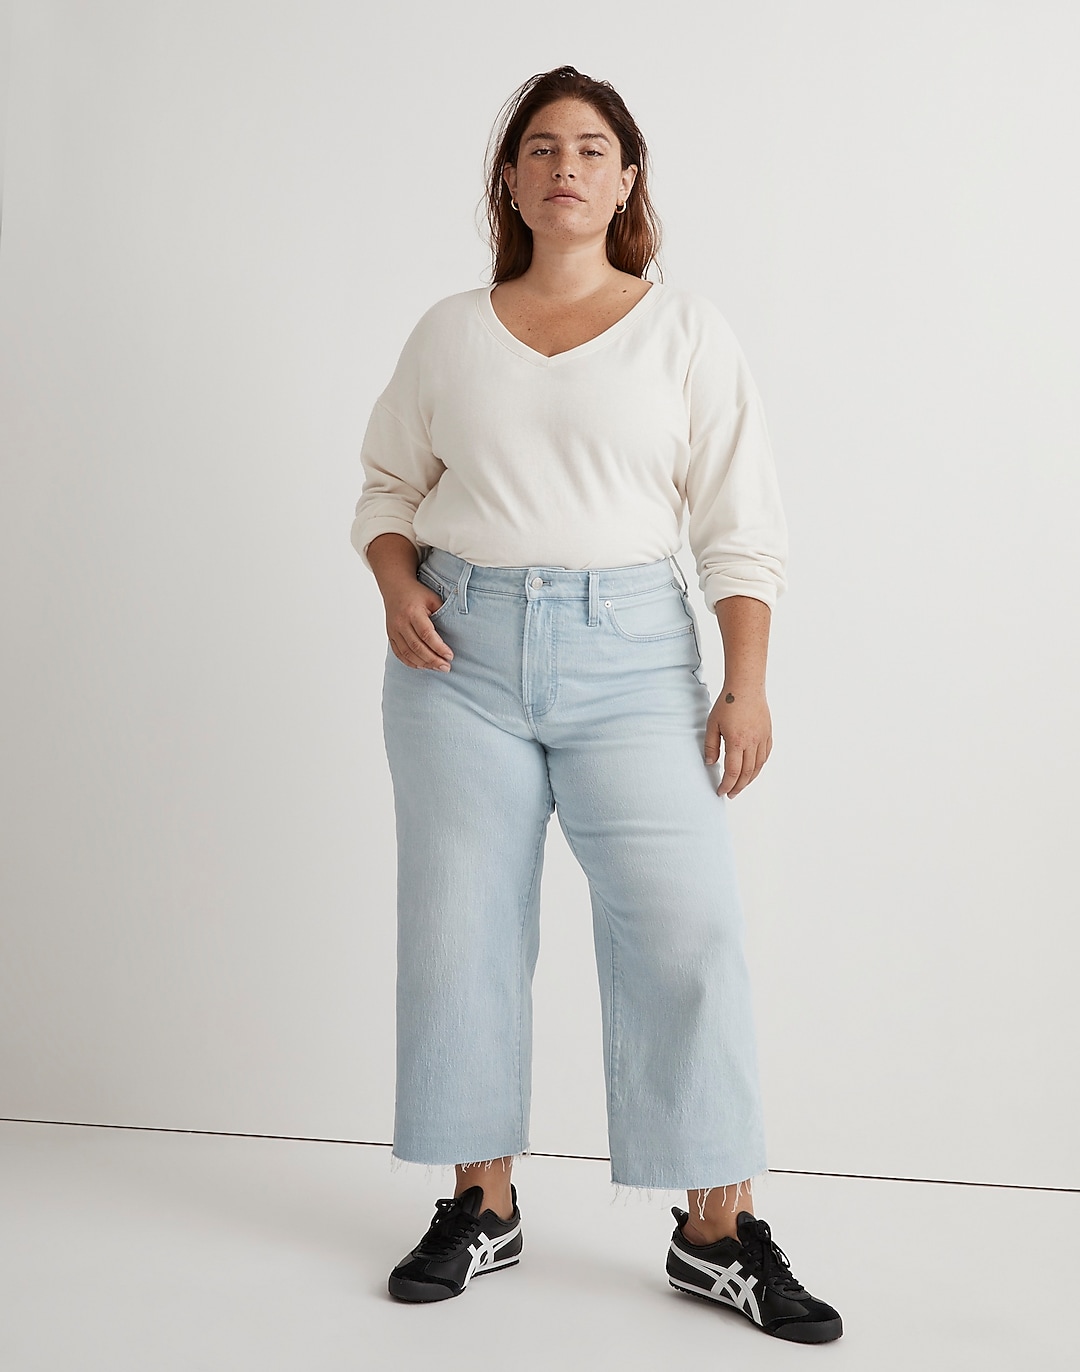 The Plus Perfect Vintage Wide-Leg Crop Jean | Madewell